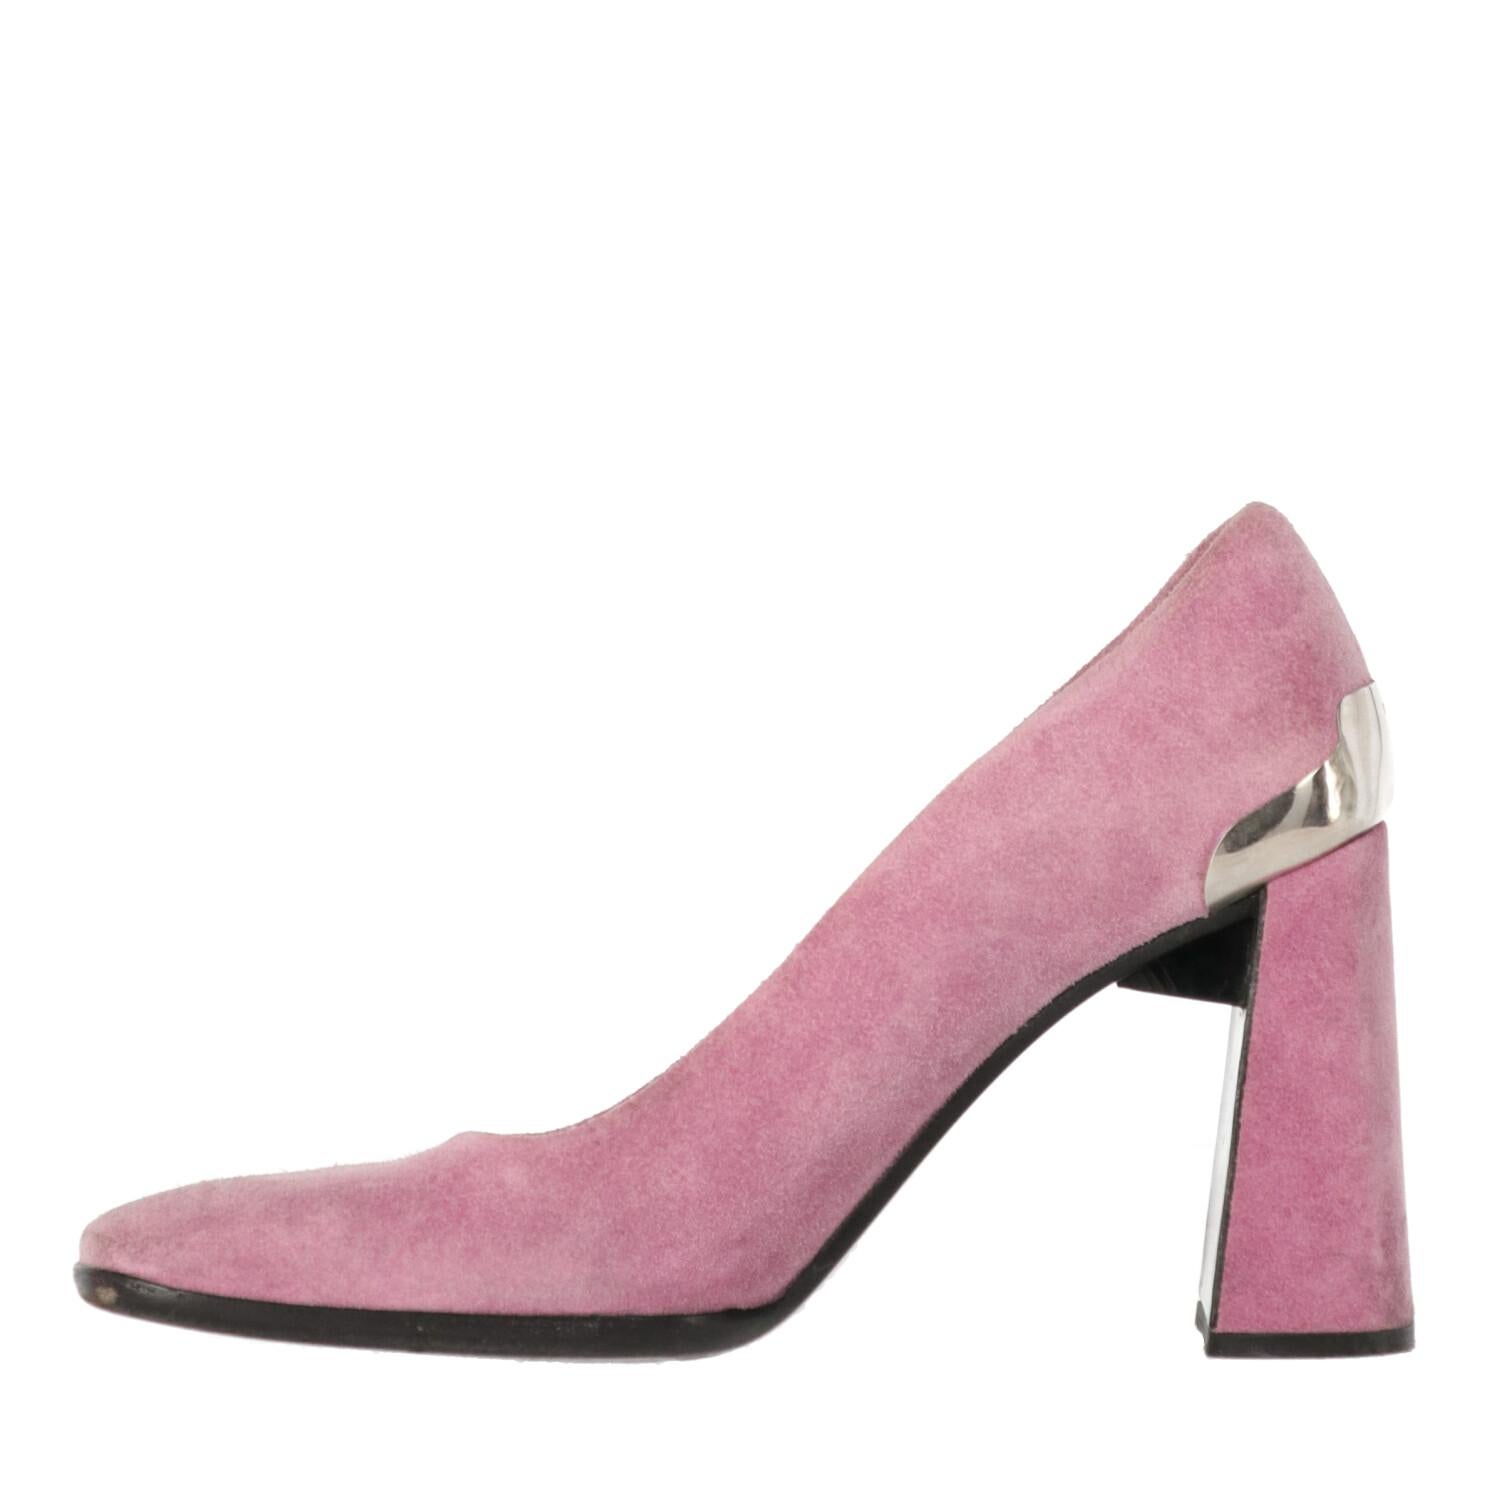 A.N.G.E.L.O. Vintage - ITALY
Prada pink suede pumps with logoed silver-tone metal detail on the heel. Square thick heel and square toe.

Item shows signs of wear on the leather and the sole, as shown in the pictures.
Years: 2000

Made in